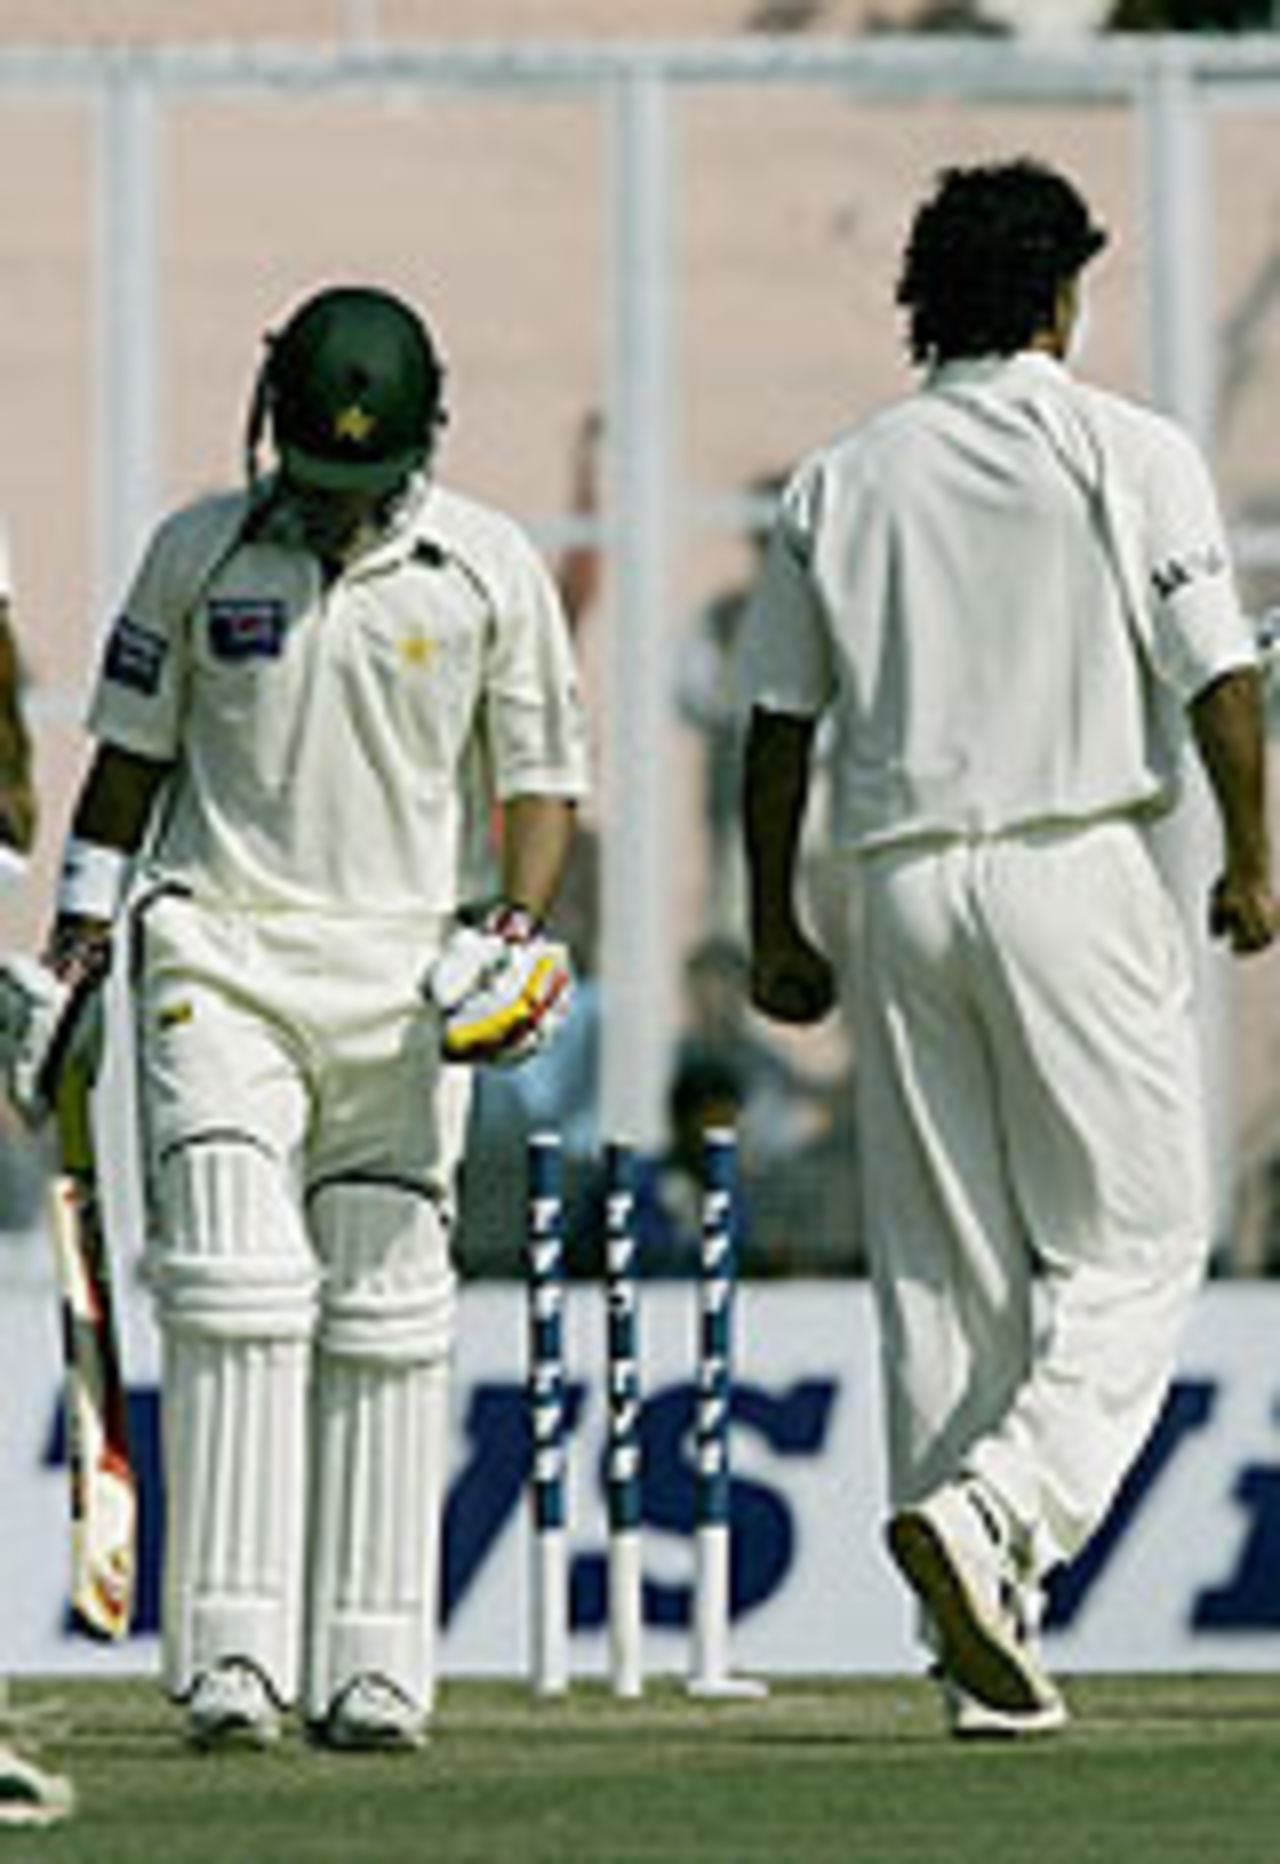 Salman Butt is dismissed by Irfan Pathan, India v Pakistan, 1st Test, Mohali, March 8, 2005